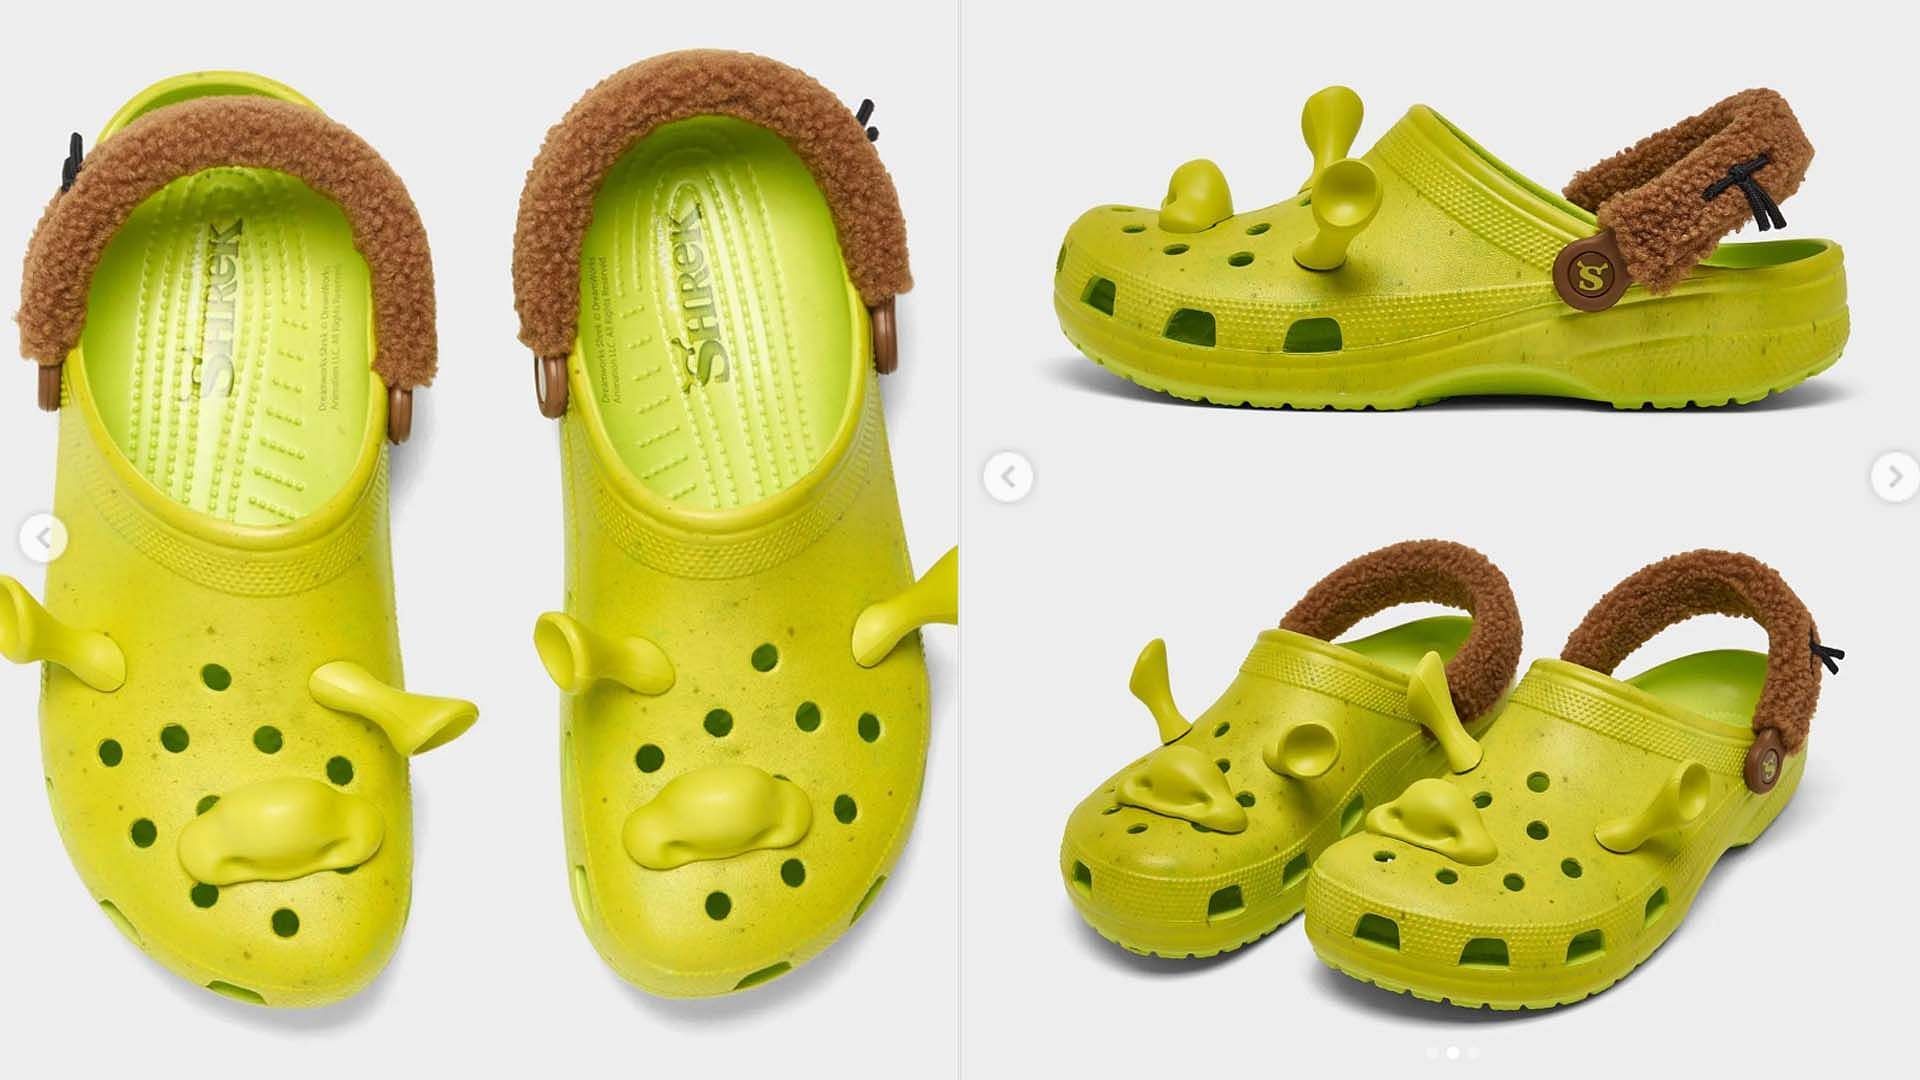 The Shrek x Crocs Classic Clog is rumored to be releasing later this month  👀 Who's going after these?